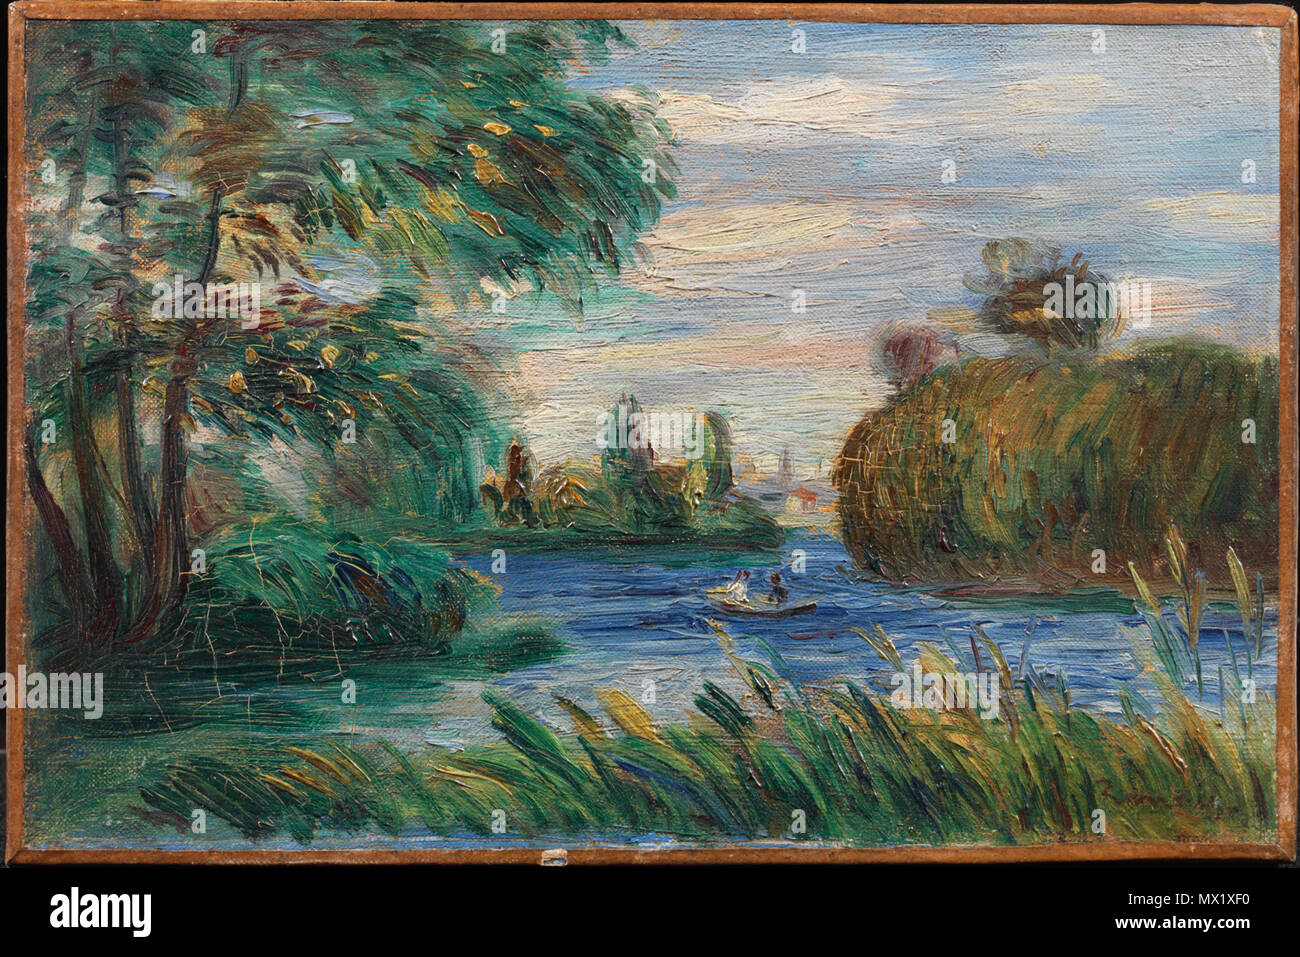 .  English: Pierre Auguste Renoir, French, 1841–1919 River Landscape Oil on canvas 16 x 24.2 cm. (6 5/16 x 9 1/2 in.) frame: 32.5 × 40 × 6.4 cm (12 13/16 × 15 3/4 × 2 1/2 in.) Gift of J. Lionberger Davis, Class of 1900 y1968-1 . before 1919 11 1887, Renoir, River Landscape Stock Photo